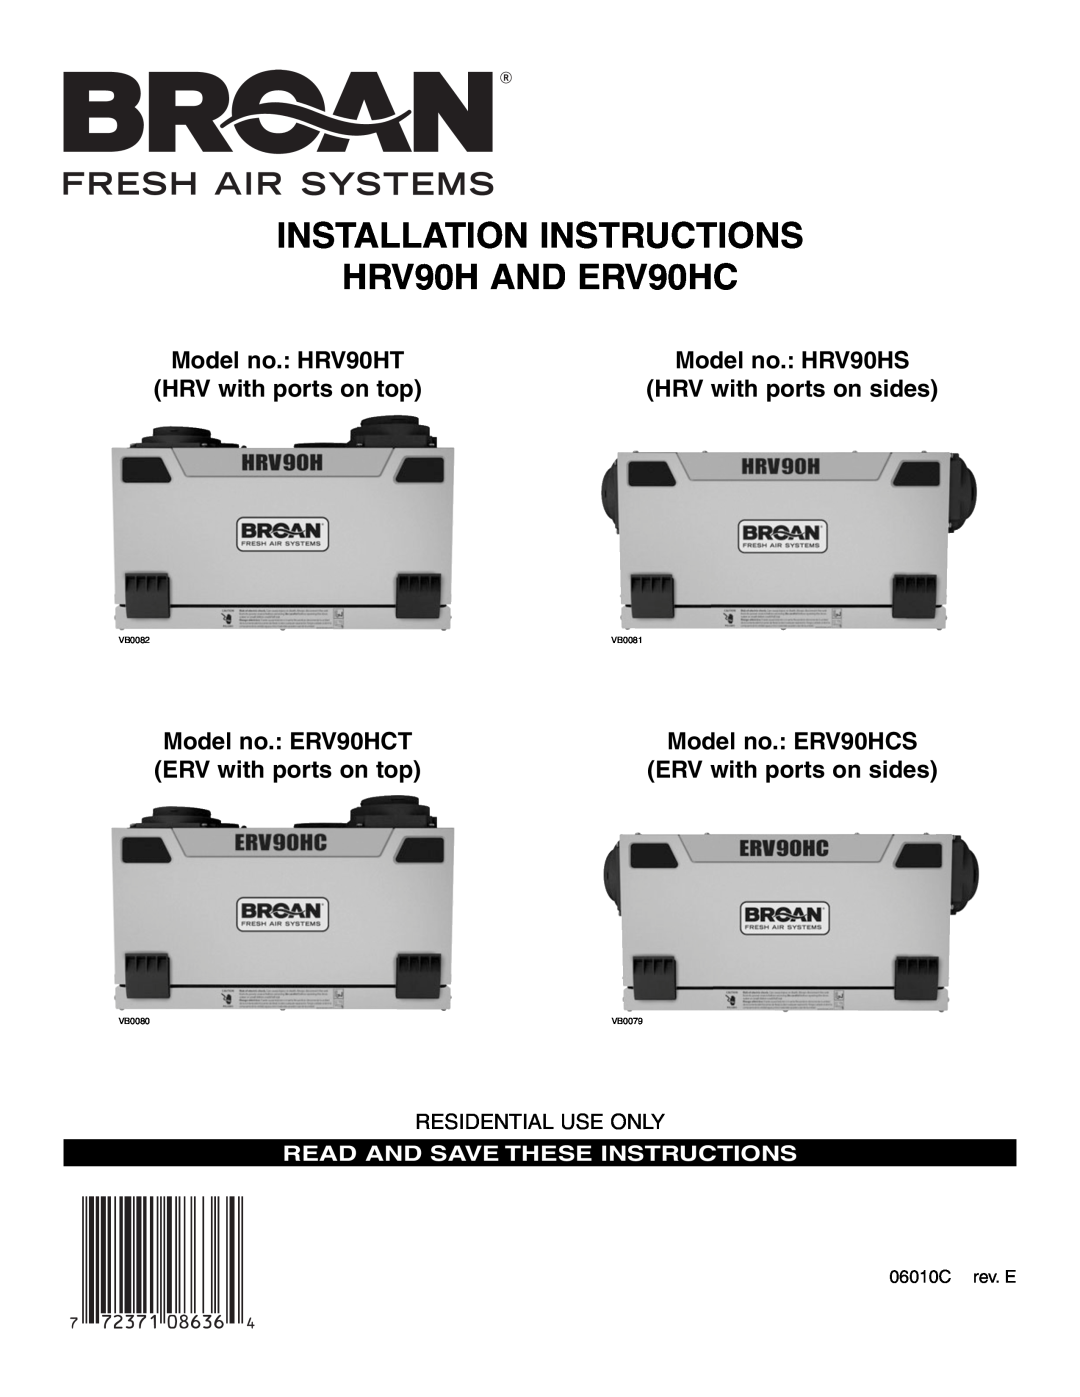 Broan installation instructions INSTALLATION INSTRUCTIONS HRV90H AND ERV90HC, HRV with ports on top, Model no. HRV90HT 